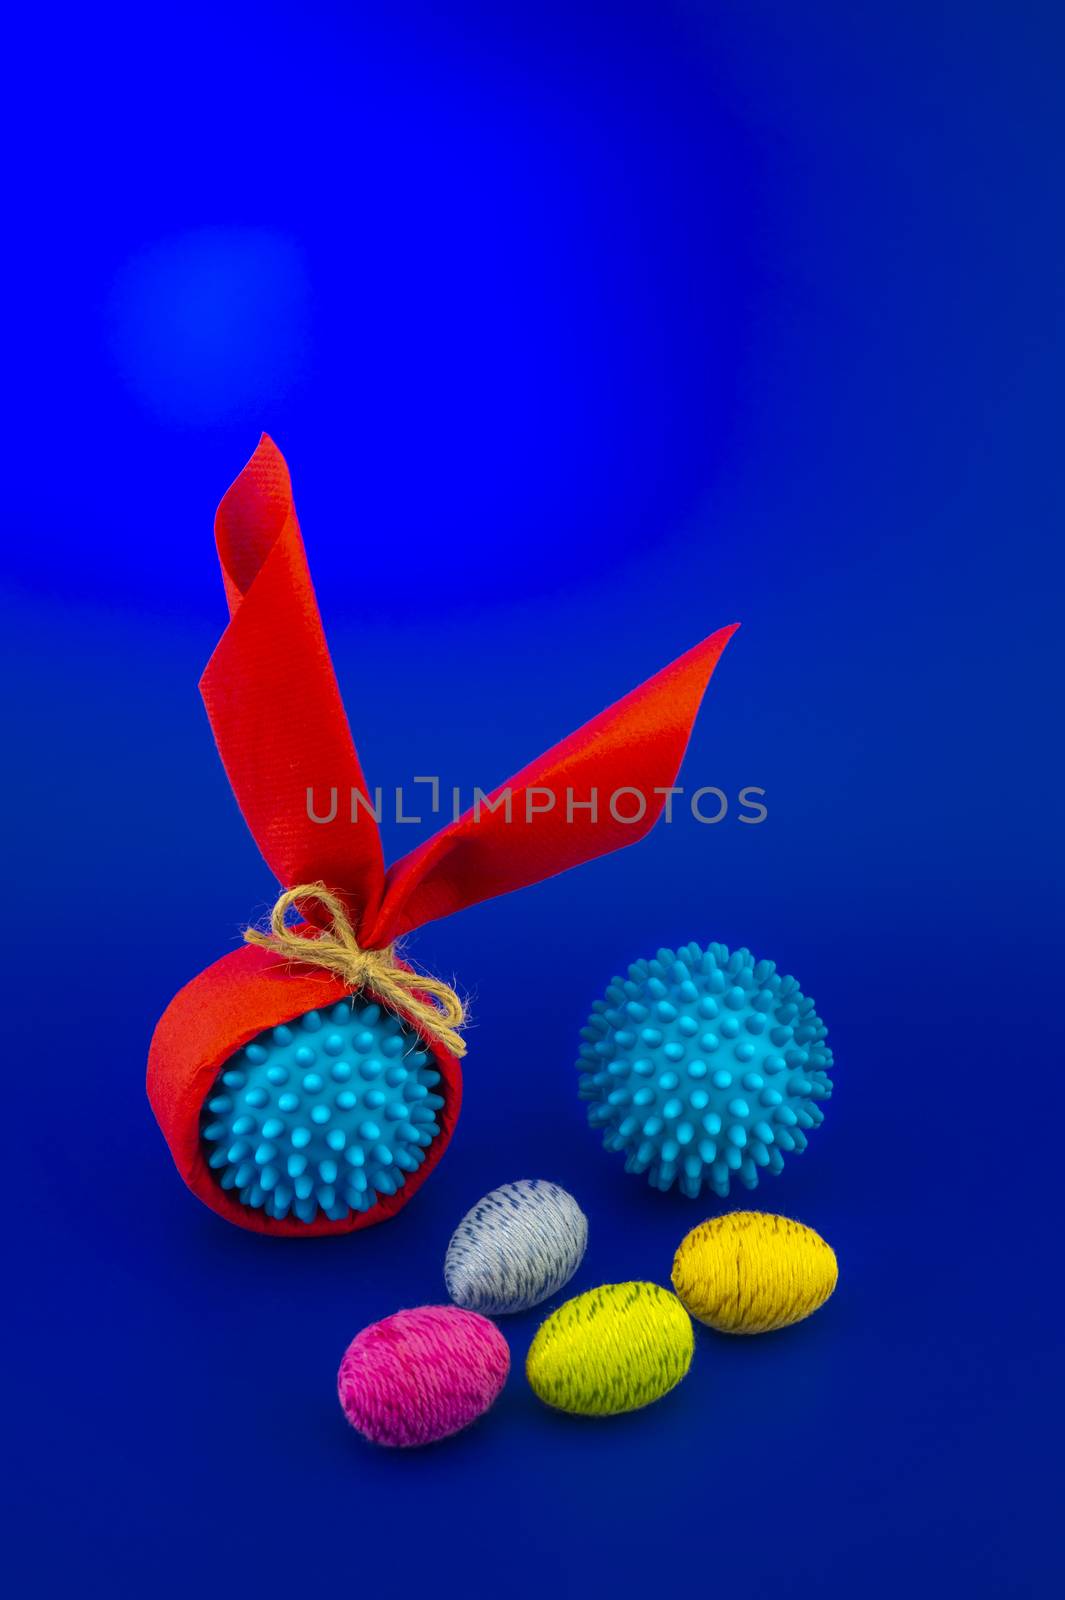 Virus models wrapped as gifts and Easter eggs by NetPix